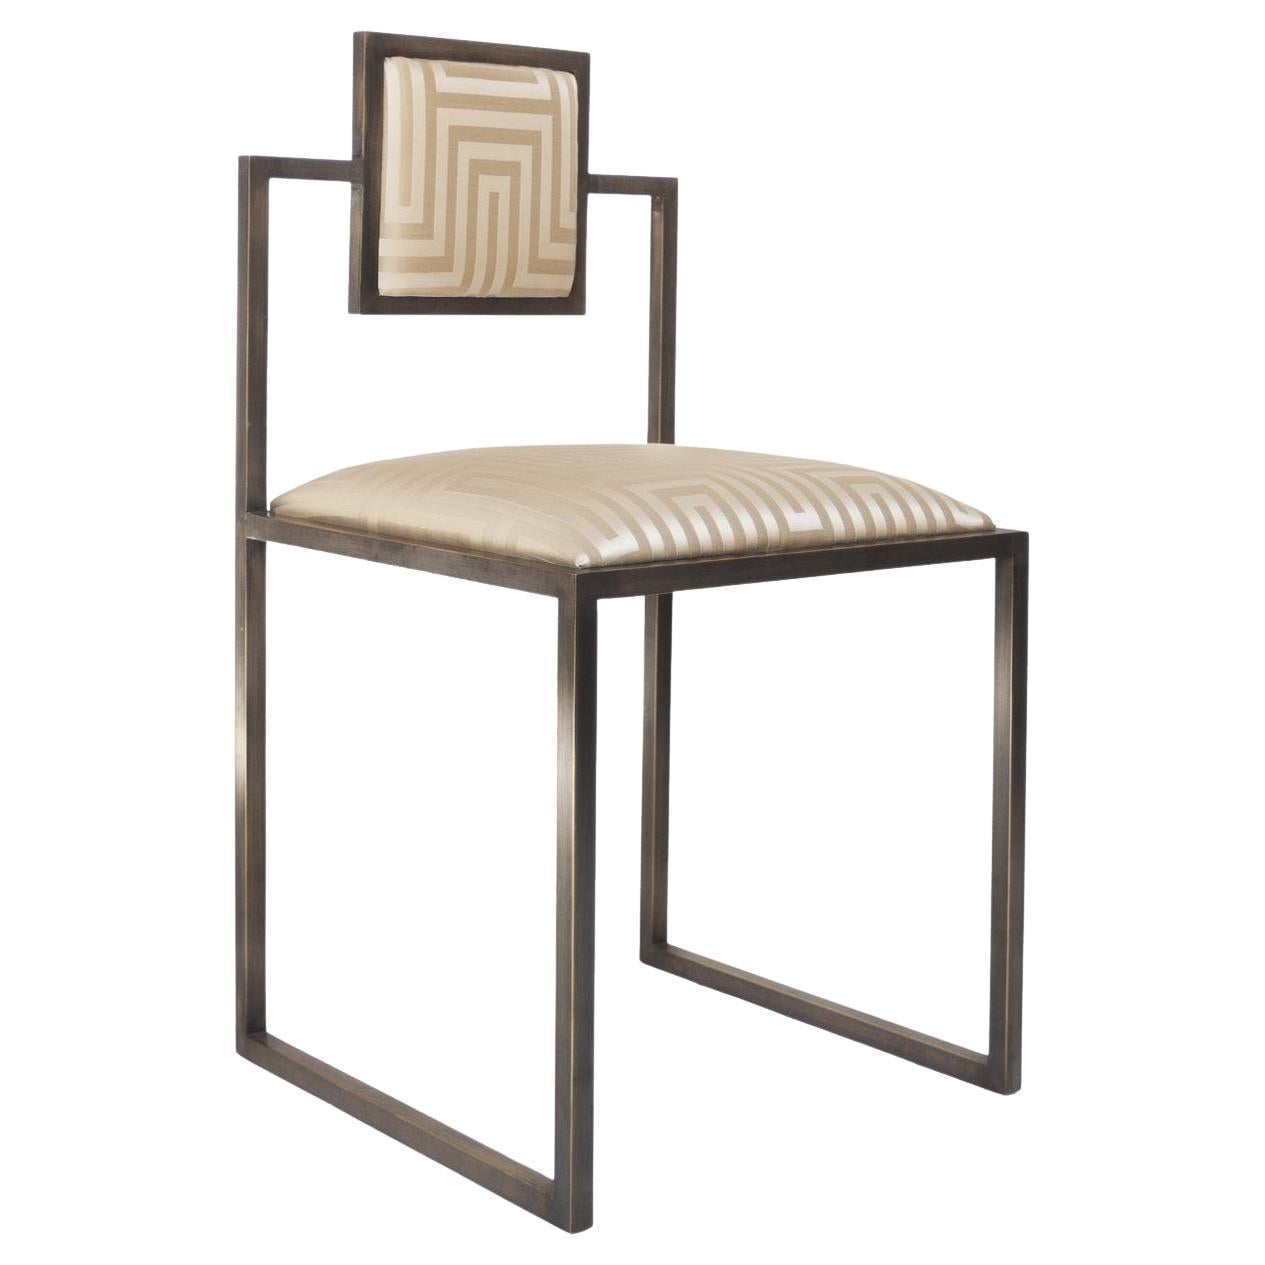 Champagne Square Chair For Sale